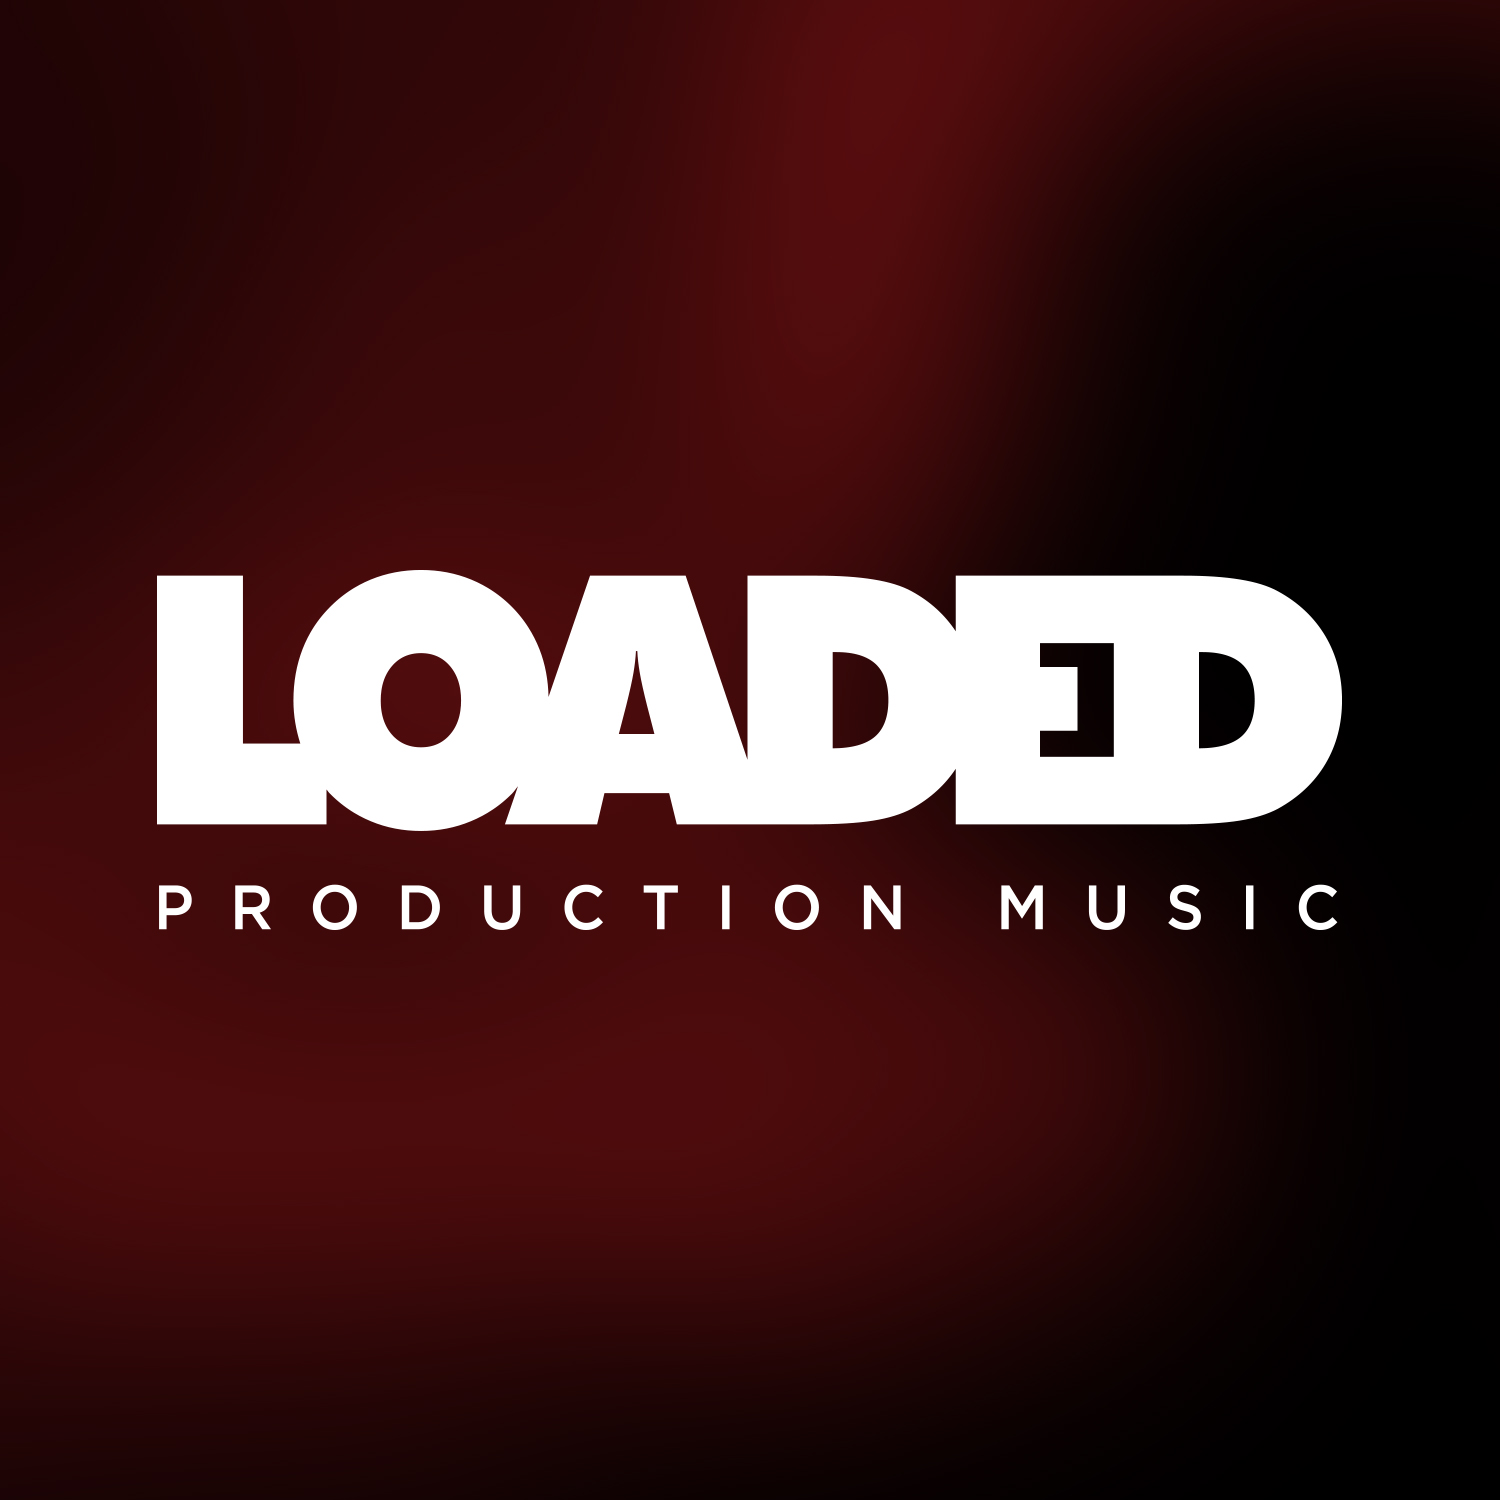 Loaded Production Music logo on red